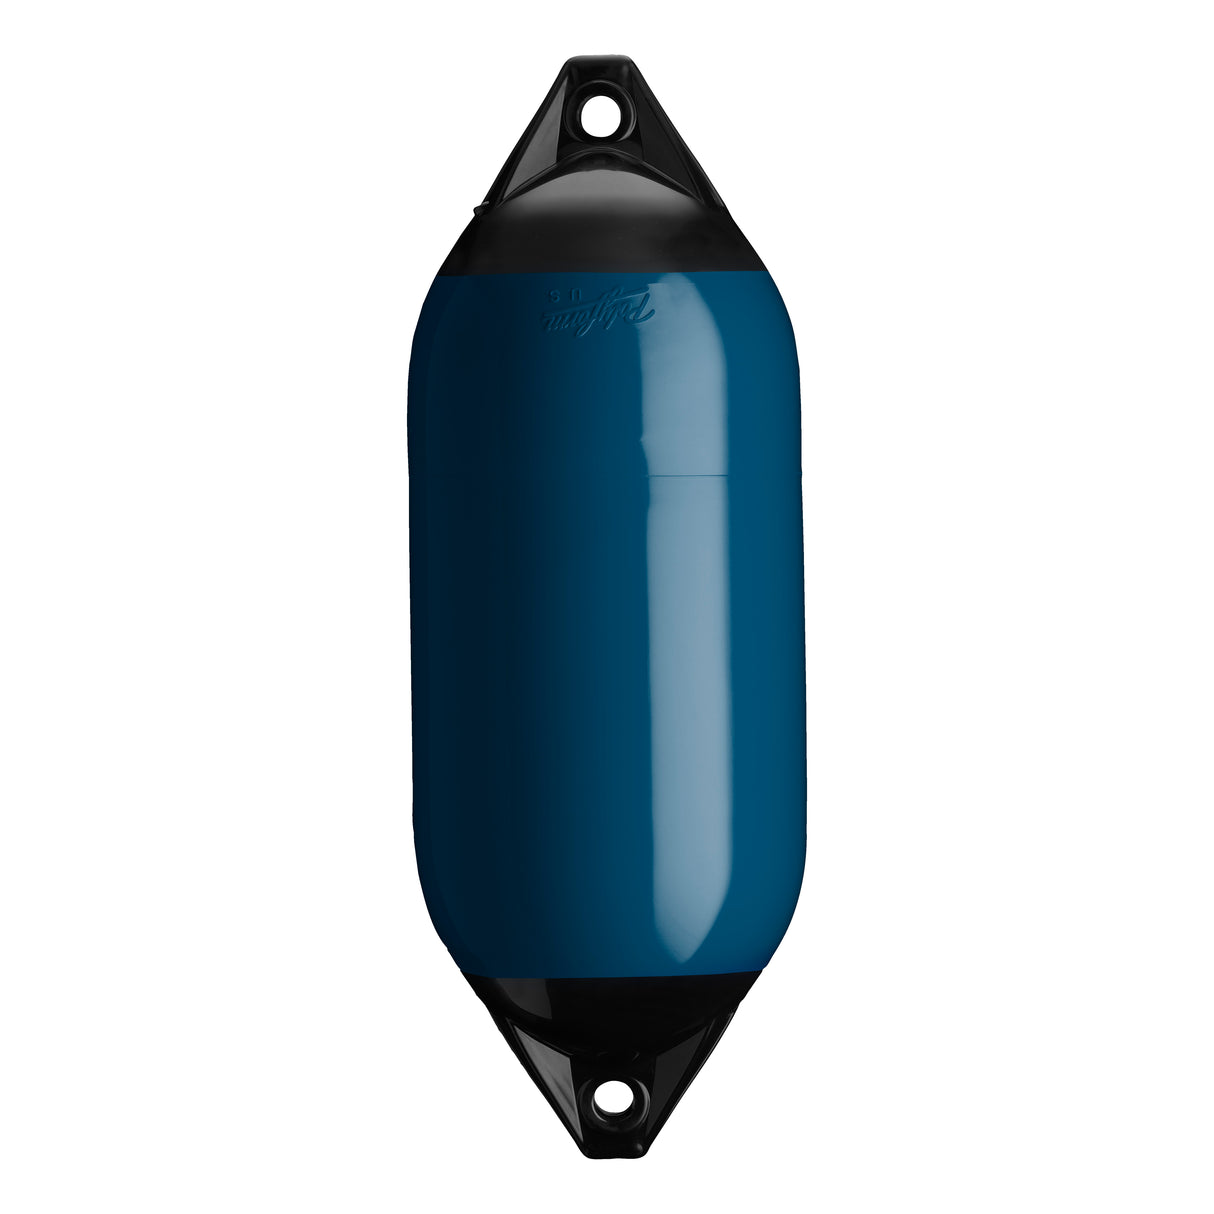 Catalina Blue boat fender with Black-Top, Polyform F-5 